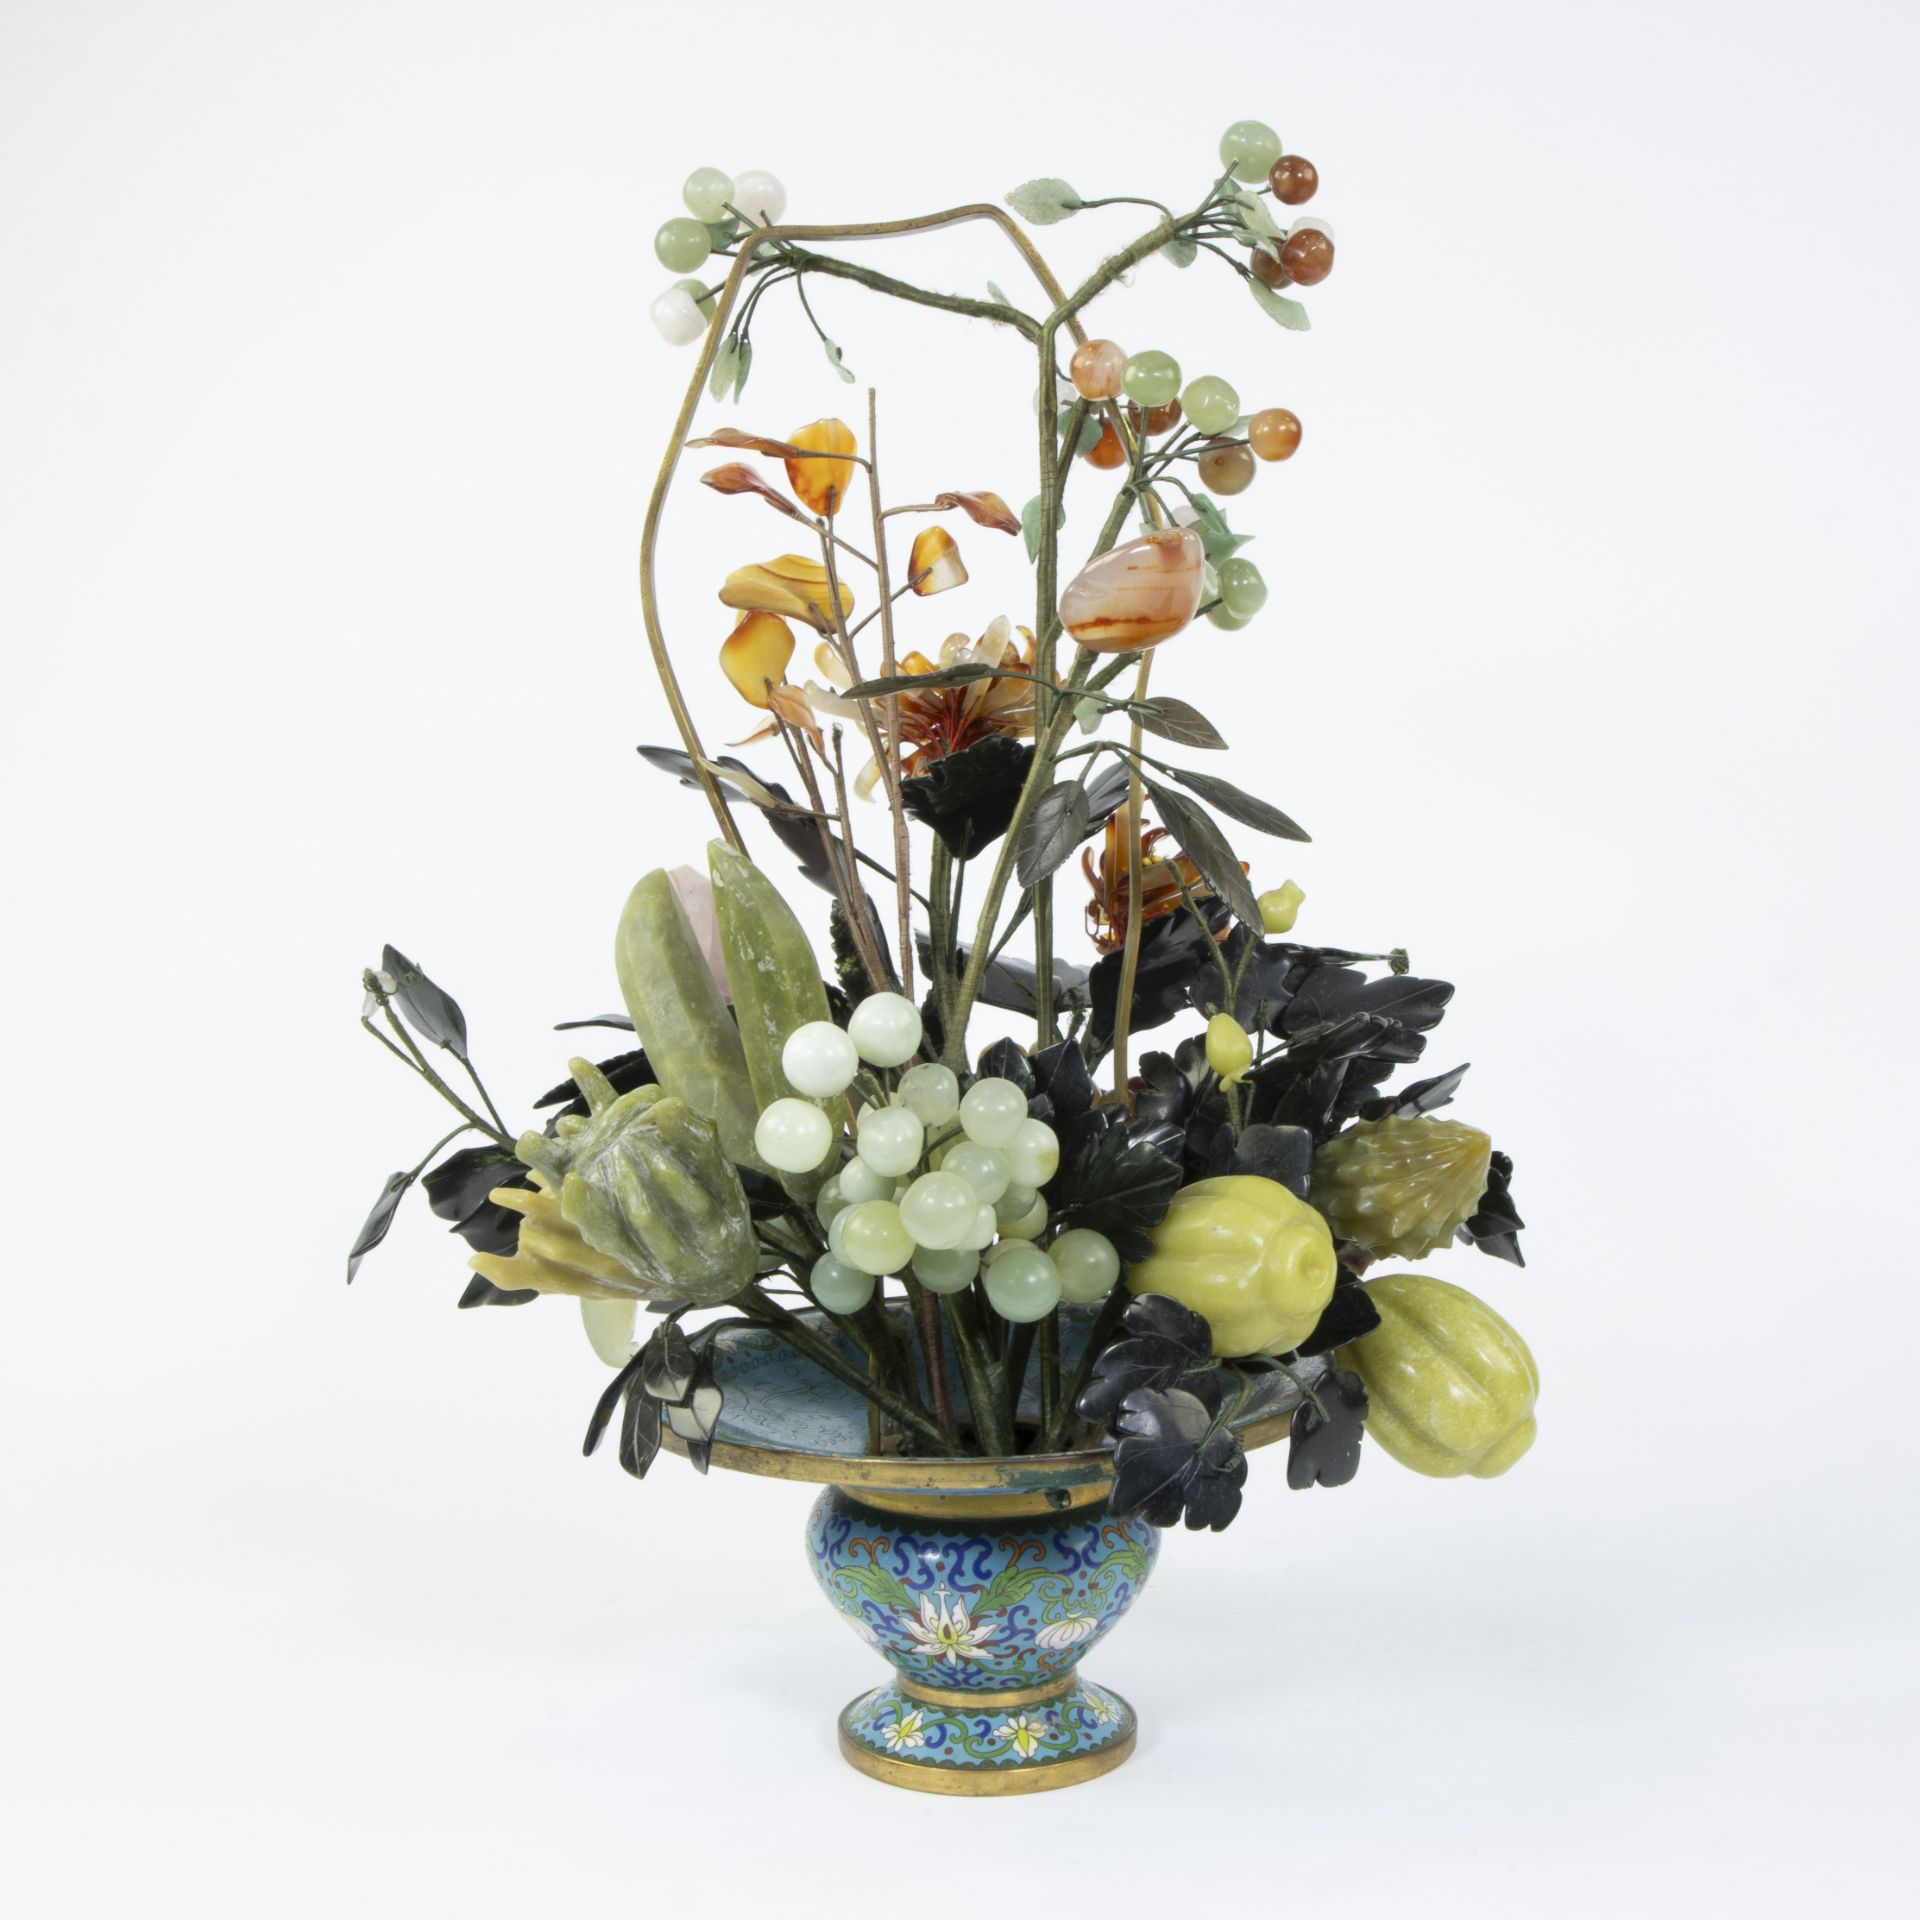 Gilt bronze Chinese cloisonne pot with a floral arrangement of hand-carved quartz glass, carnelian, - Image 3 of 4